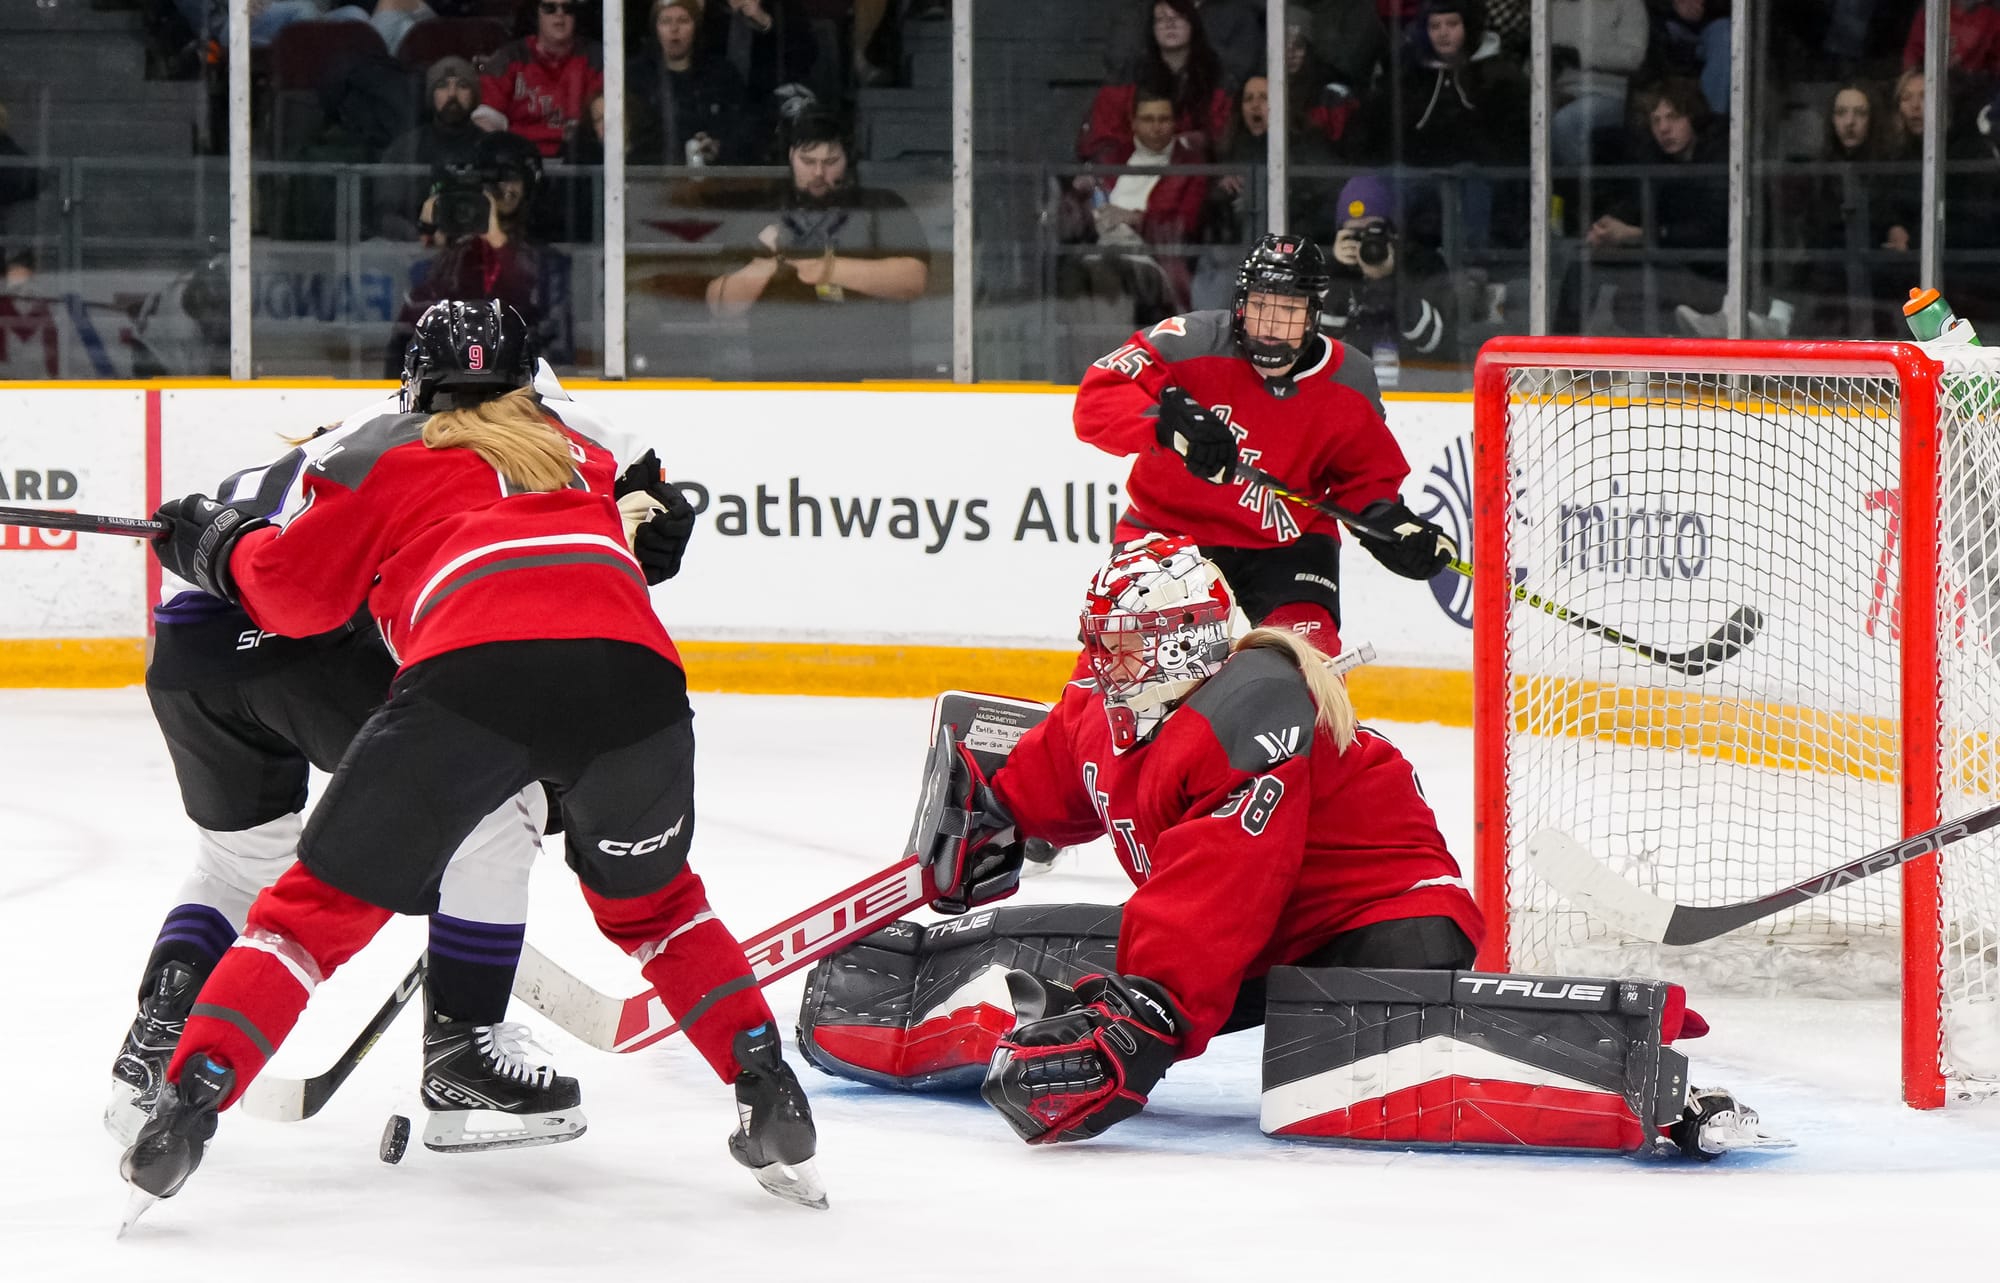 Emerance Maschmeyer, wearing a red home jersey, black and red gear, and her Ottawa mask, makes a save against Minnesota. 